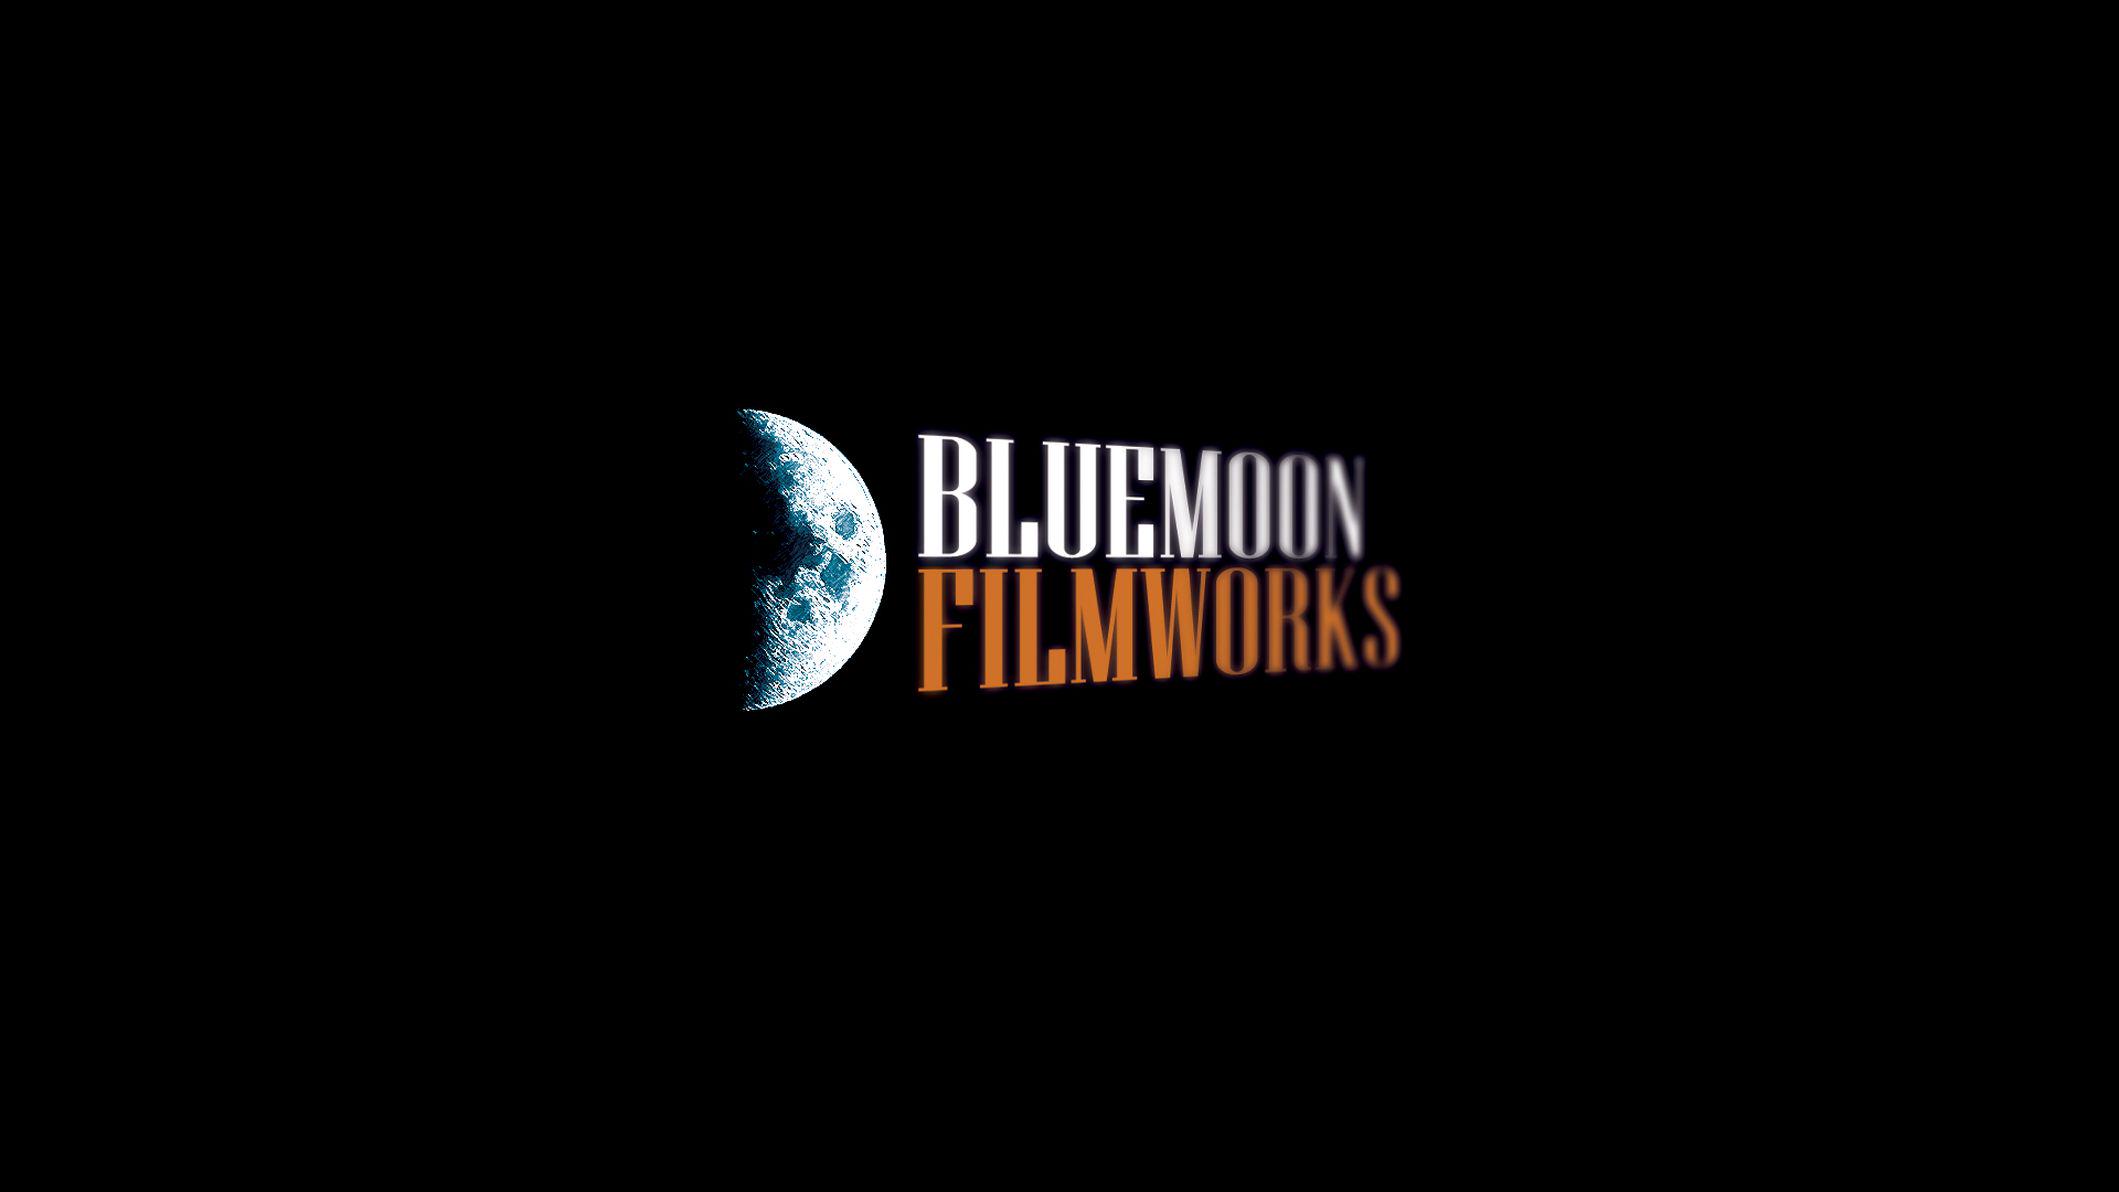 Bluemoon Filmworks profile on Qualified.One